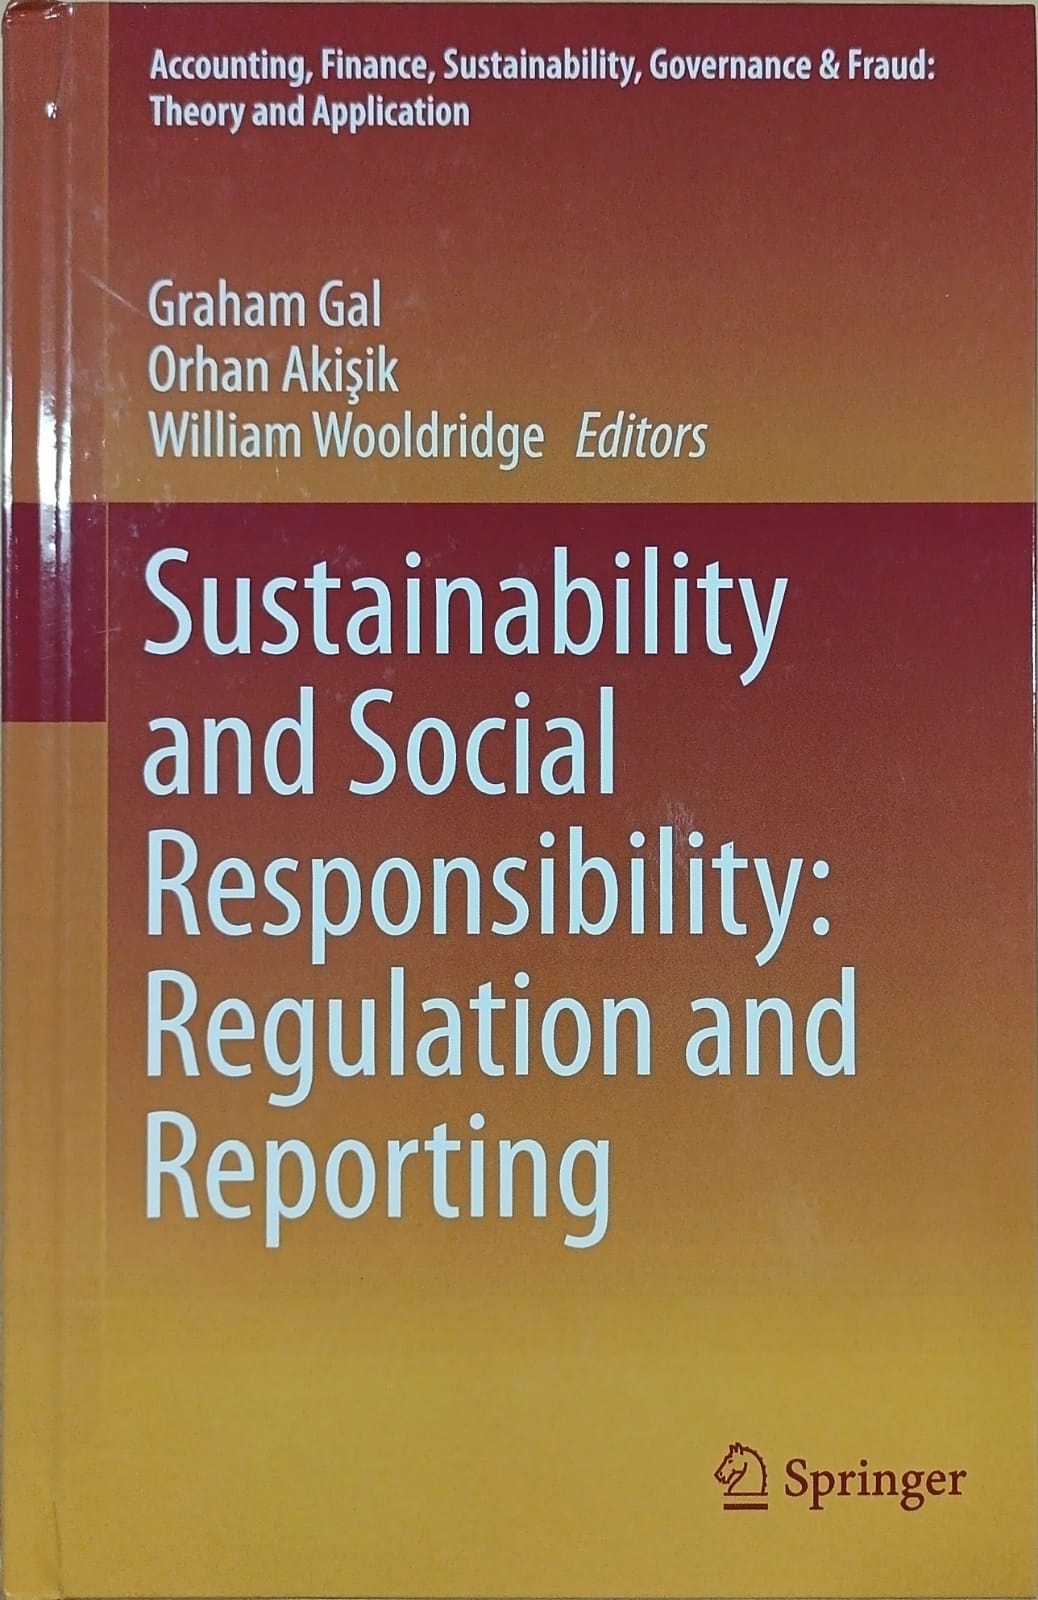 Sustainability and social responsibility: regulation and reporting